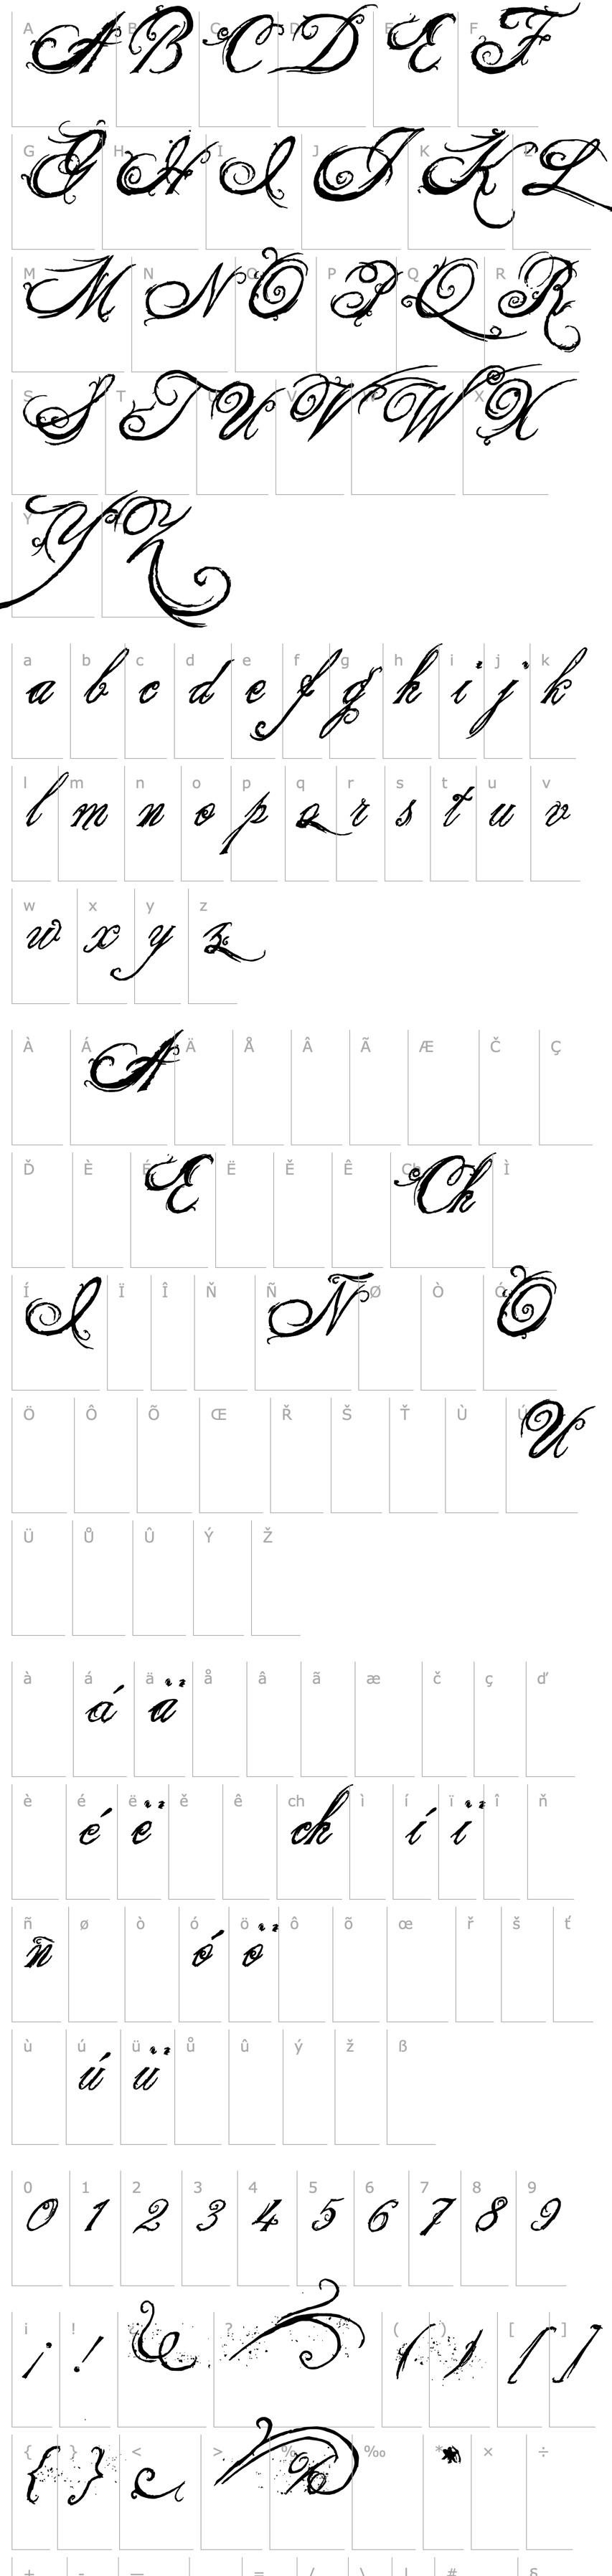 Overview the King & Queen font